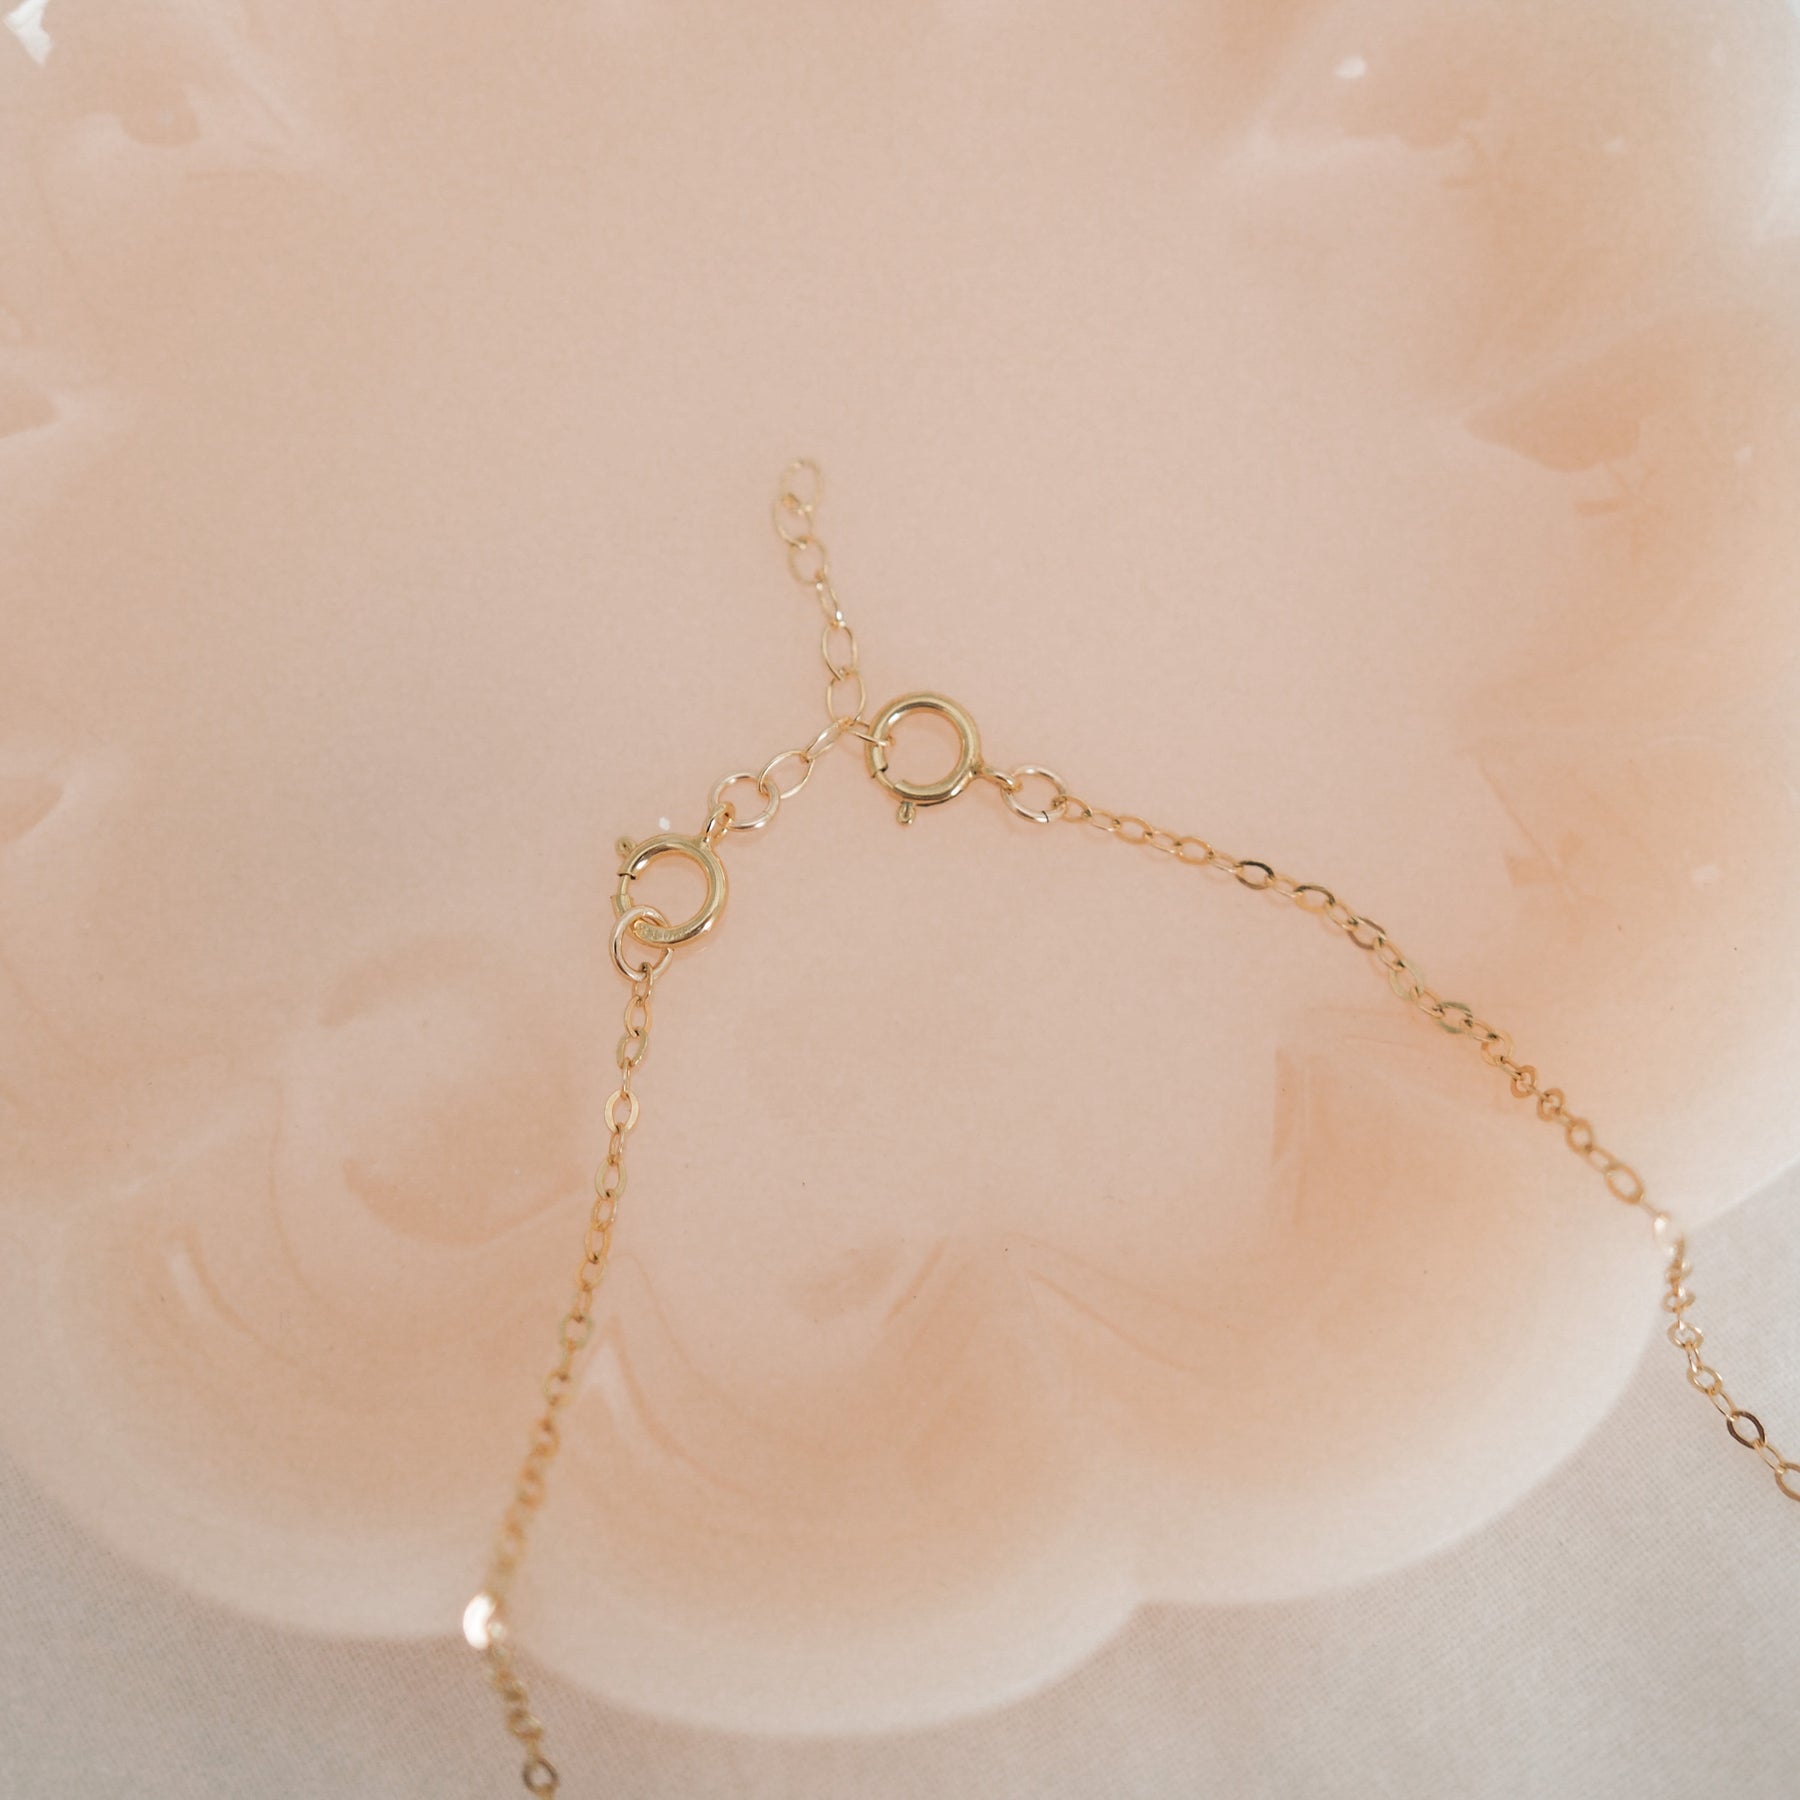 Necklace Extender – The Dainty Doe